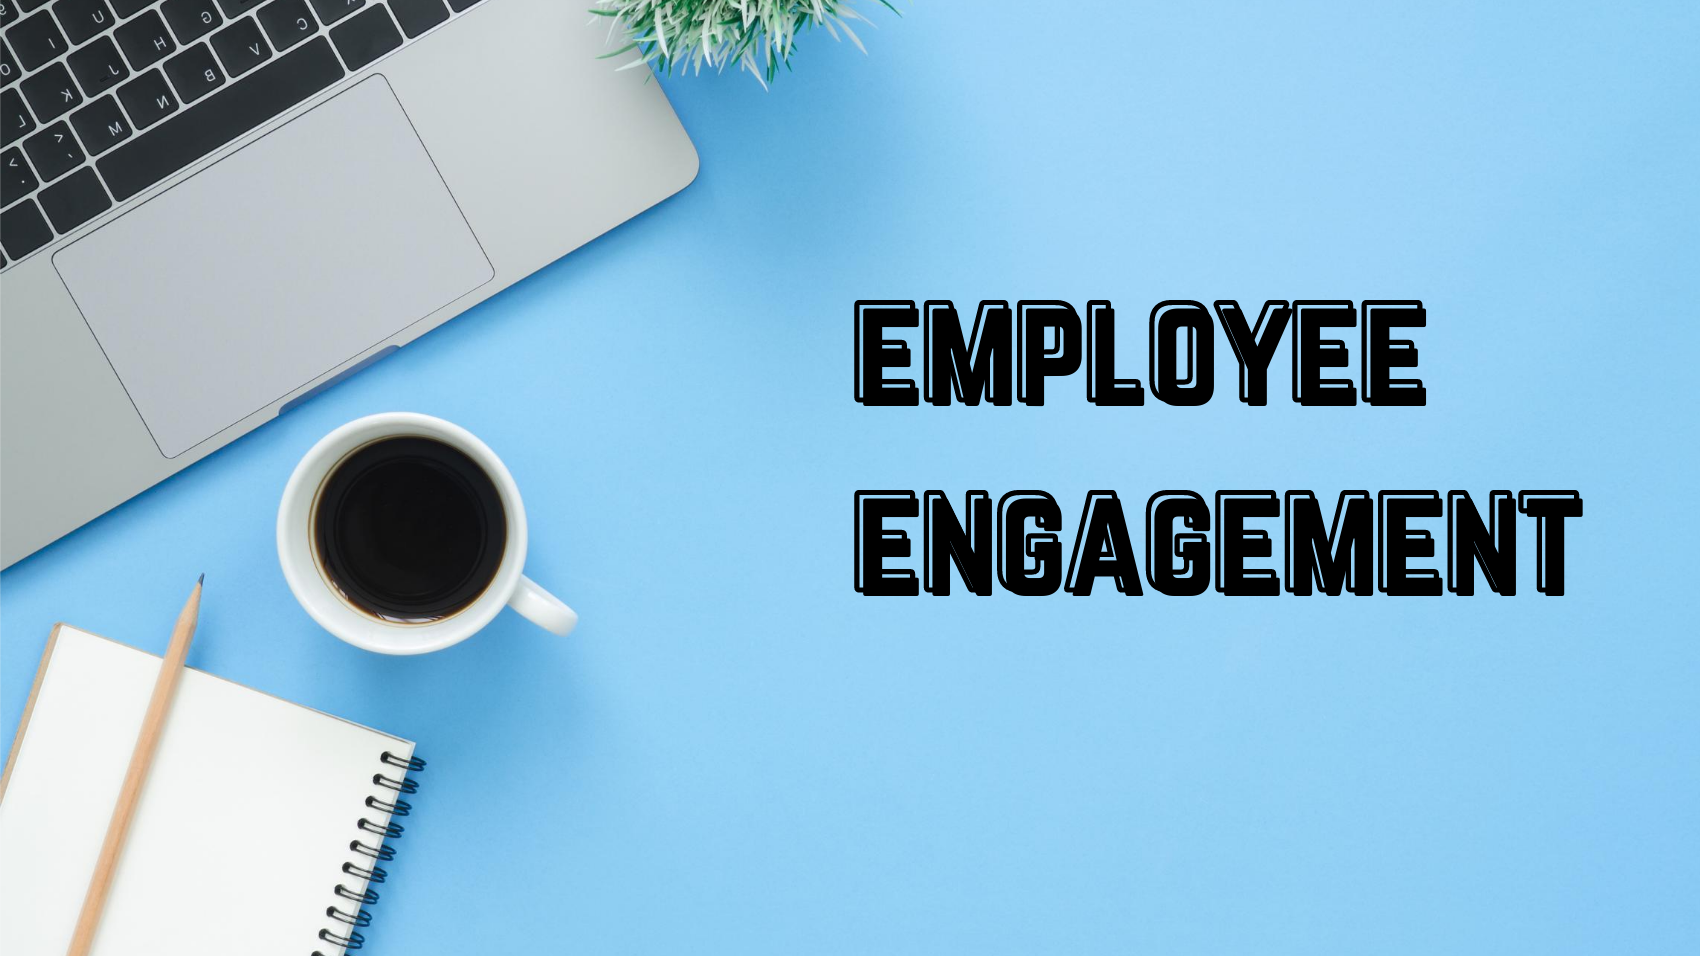 Welcome To The Employee Engagement In Times Of Crisis Webinar! | PWorld